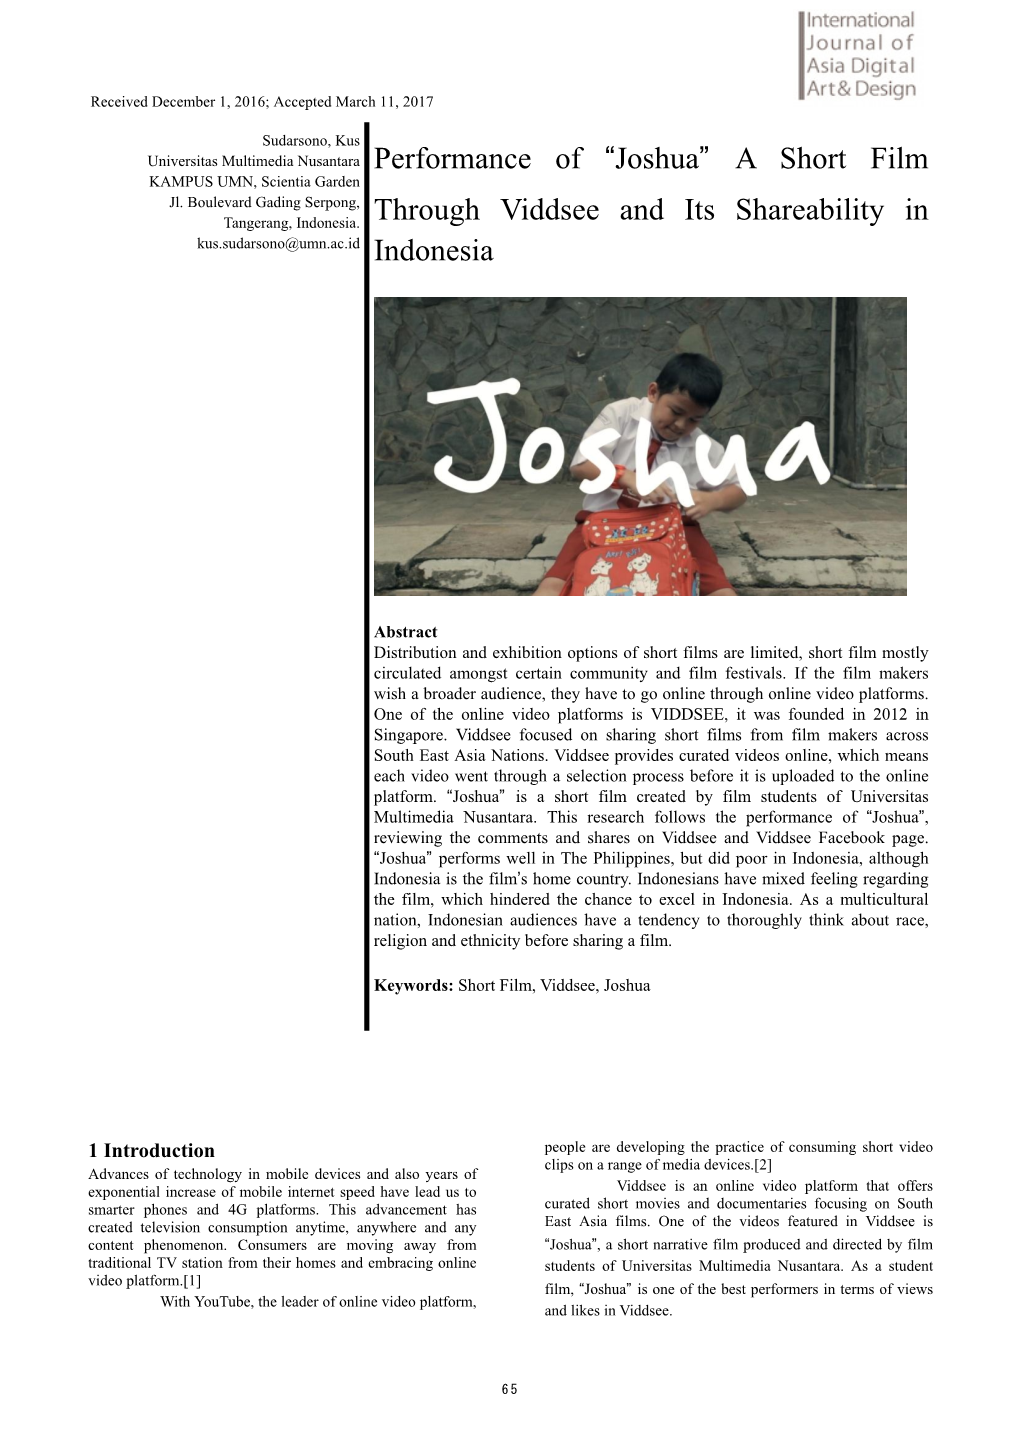 “Joshua” a Short Film Through Viddsee and Its